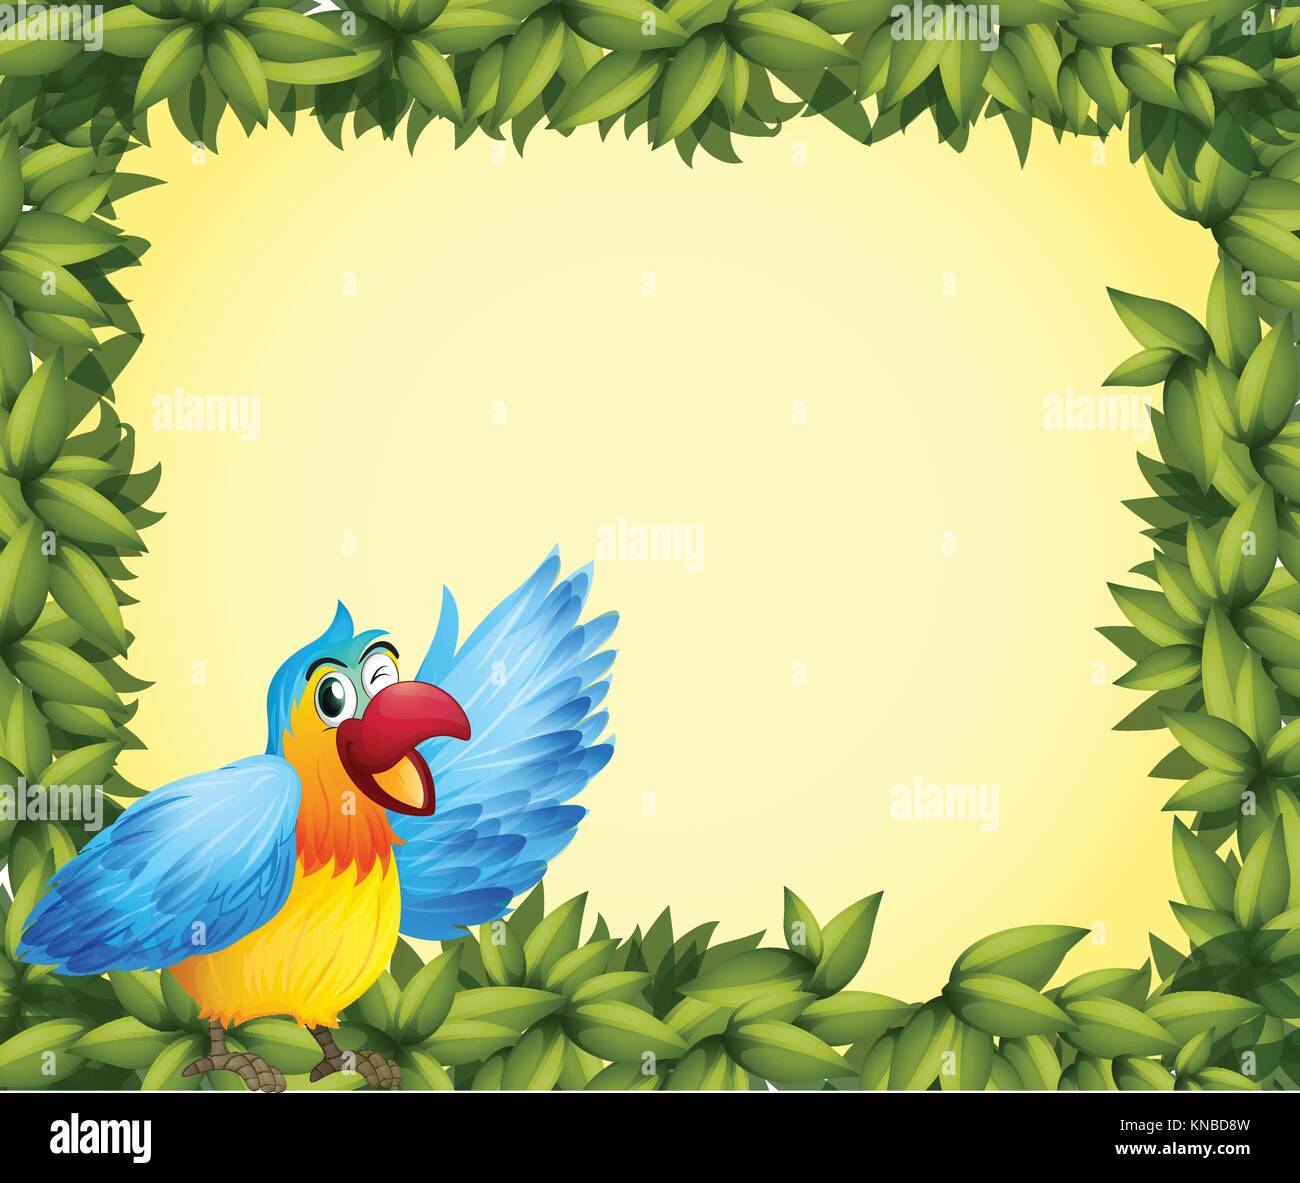 Illustration of a colorful parrot and the green leafy frame Stock Vector